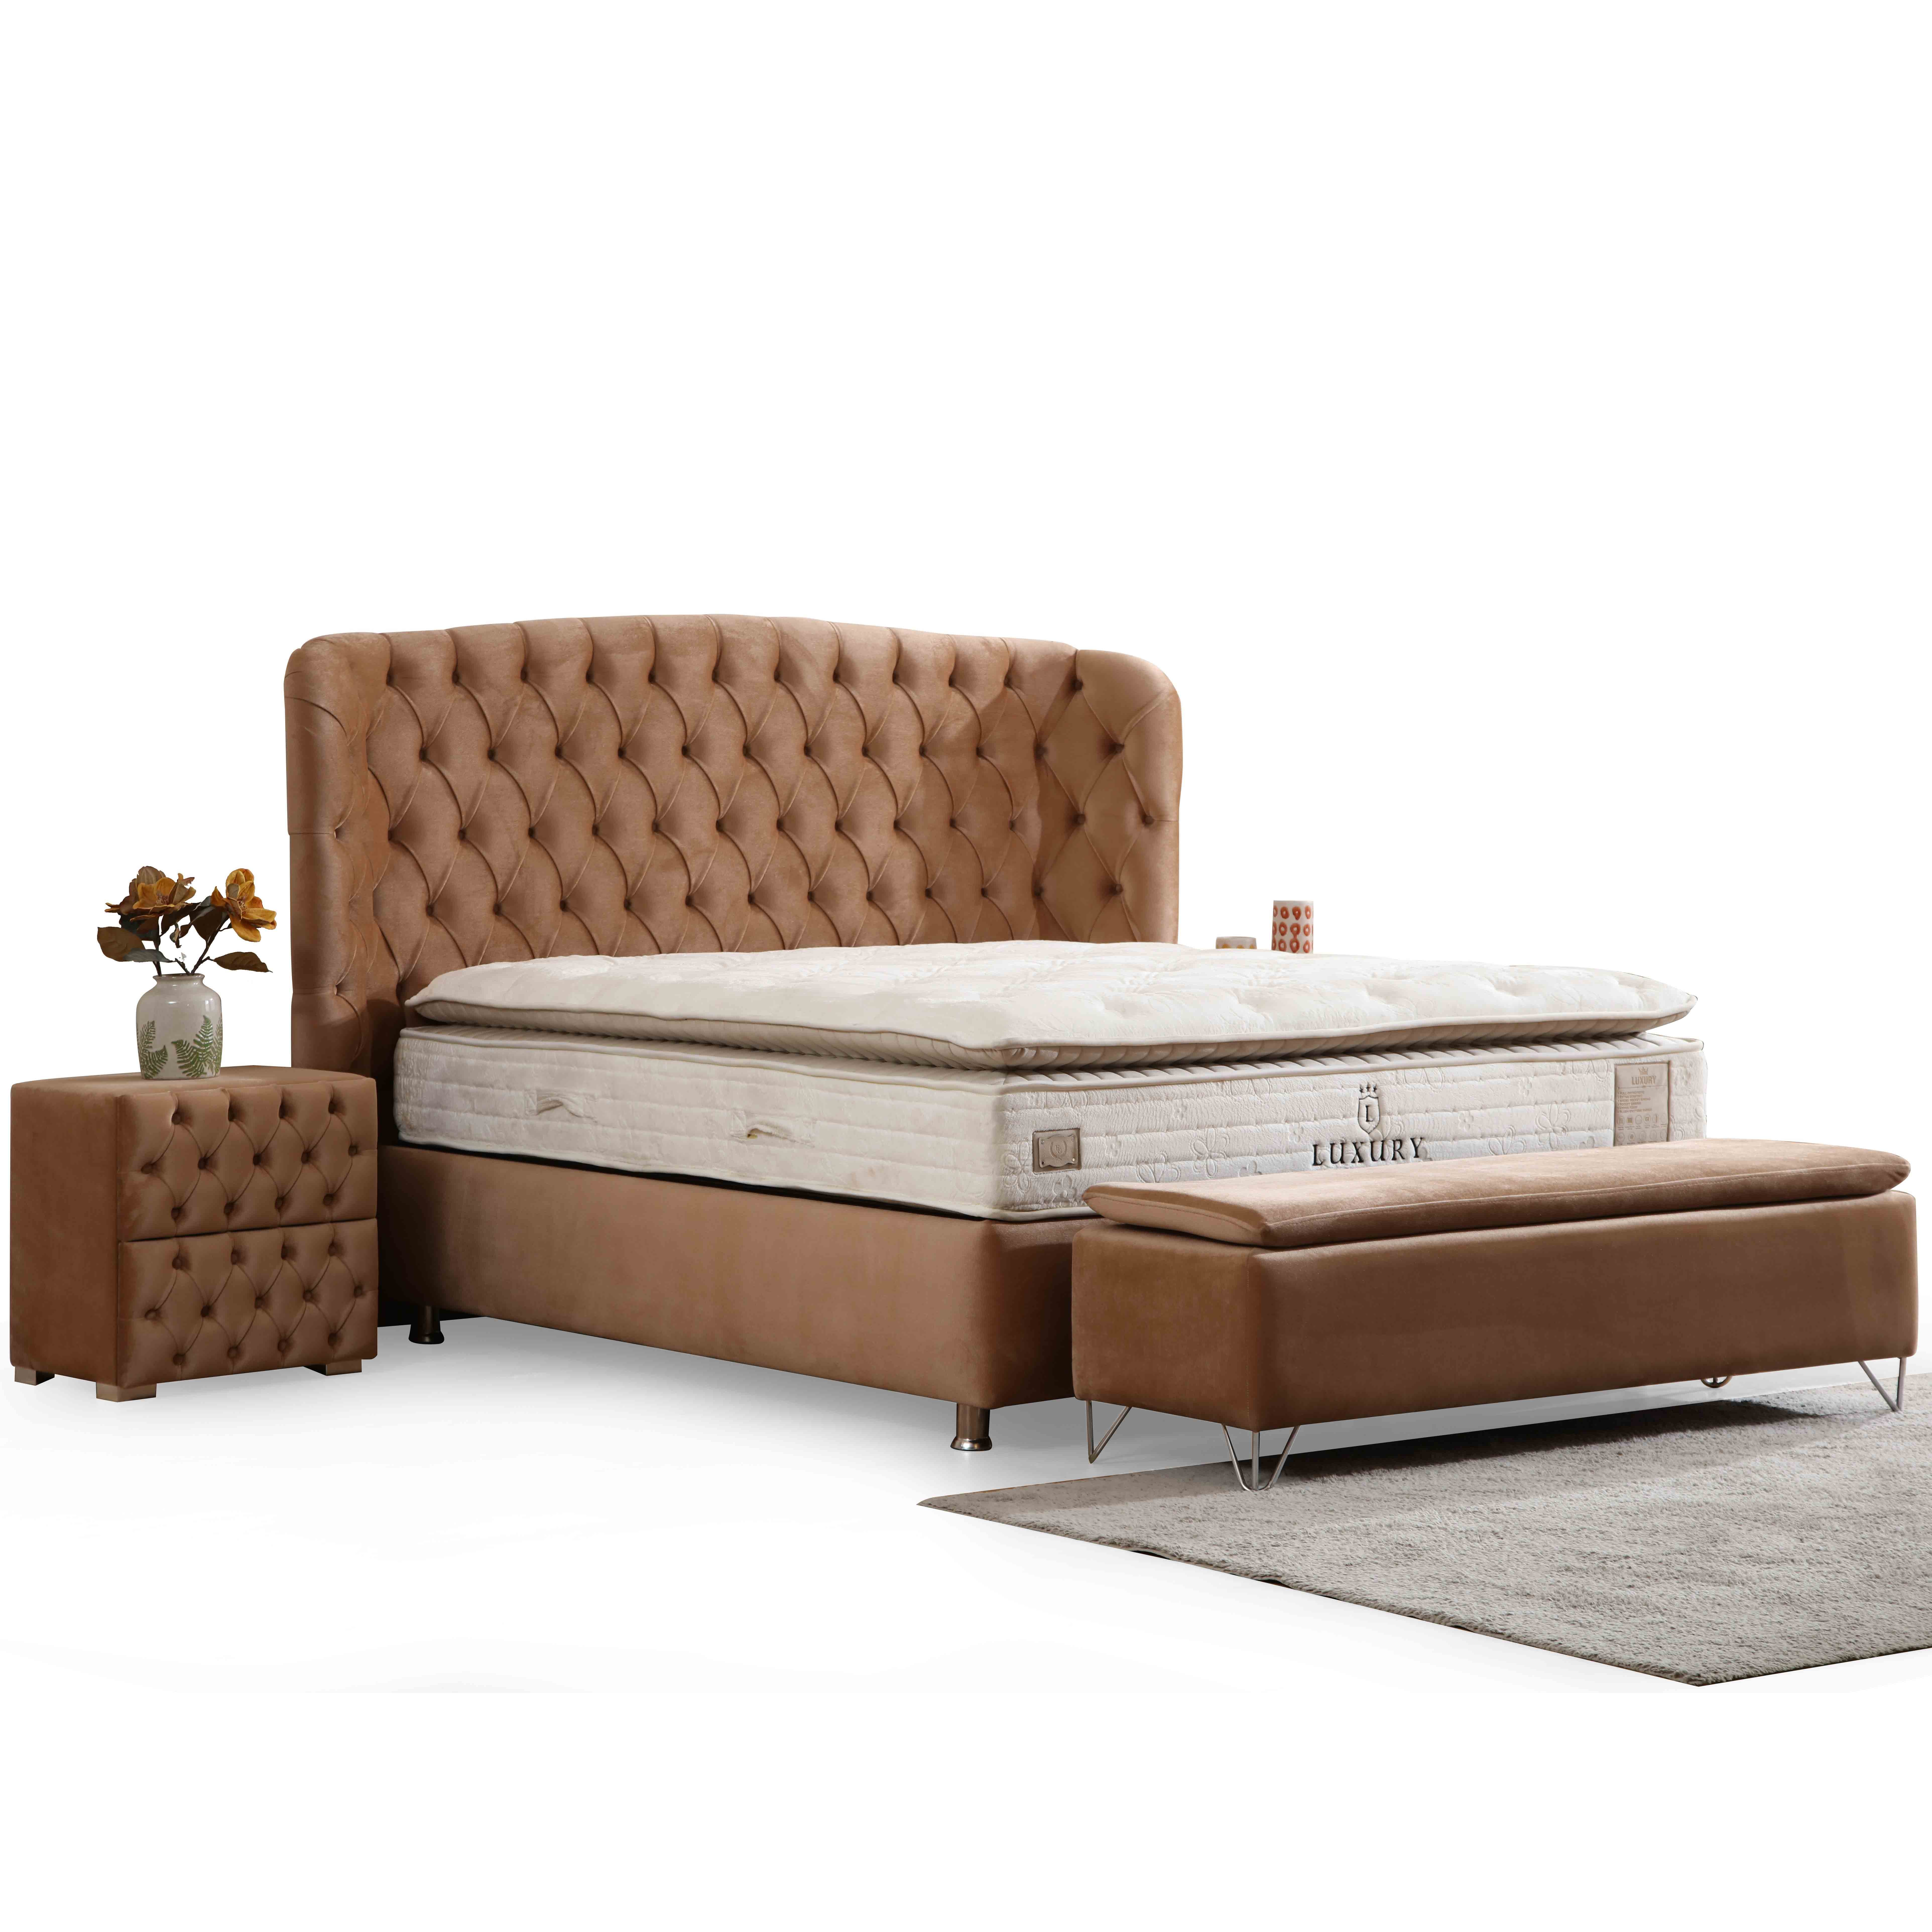 Riva Bedroom (Bed With Storage 160x200cm)